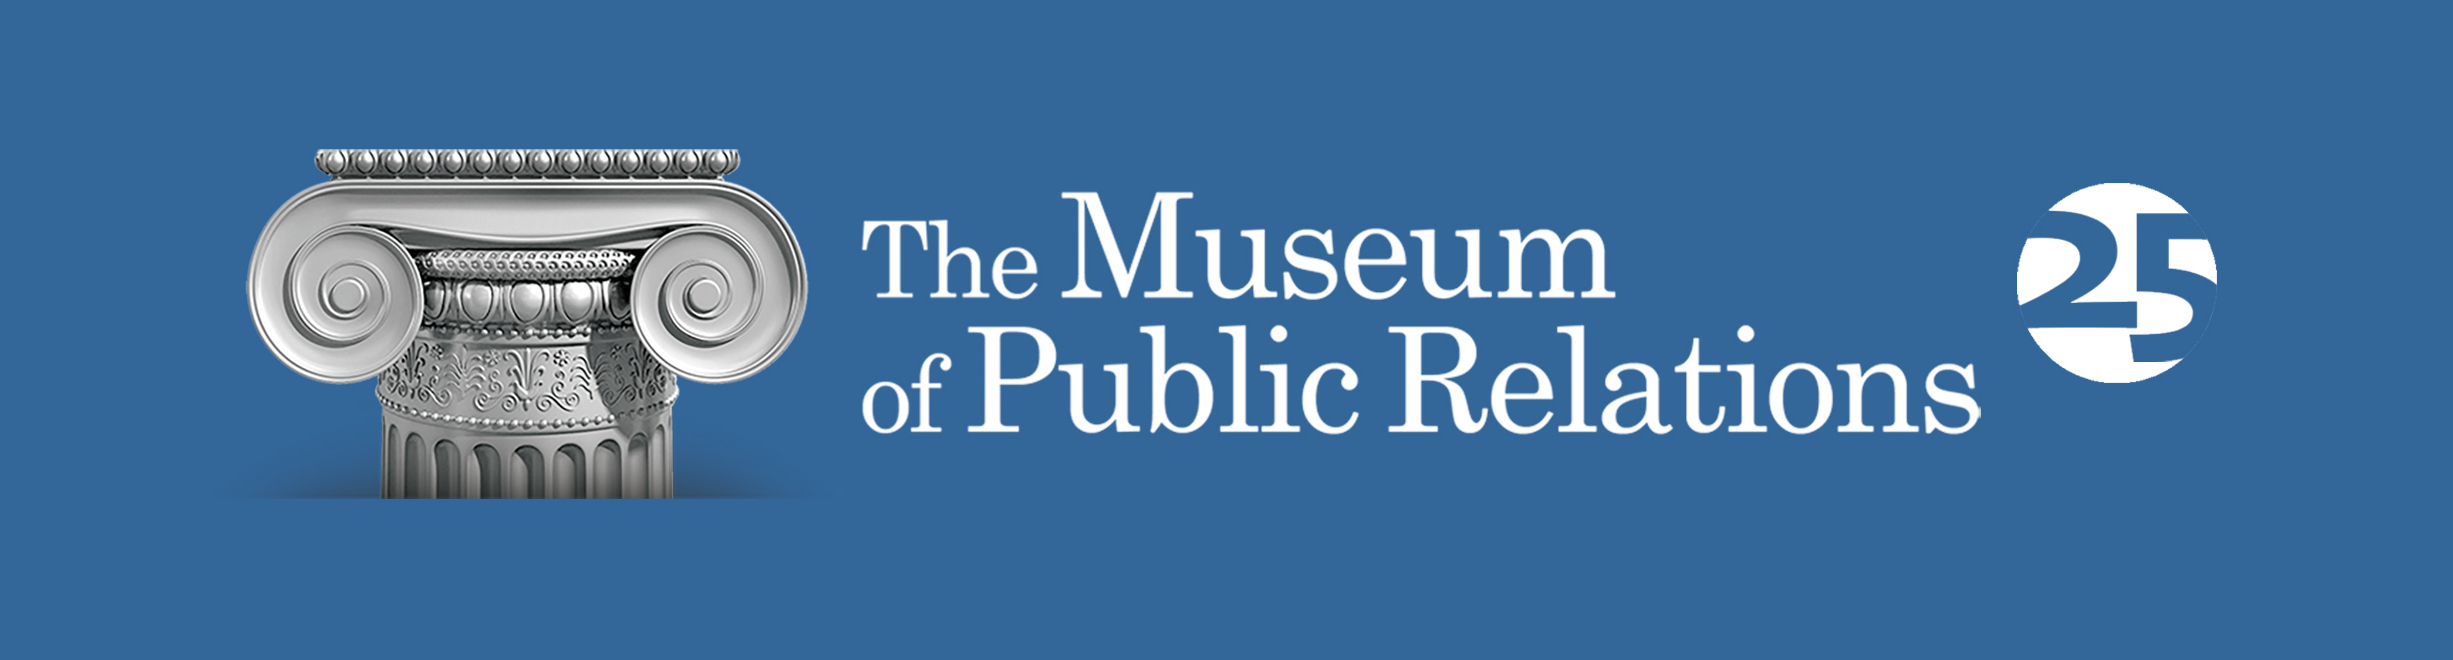 The Museum of Public Relations